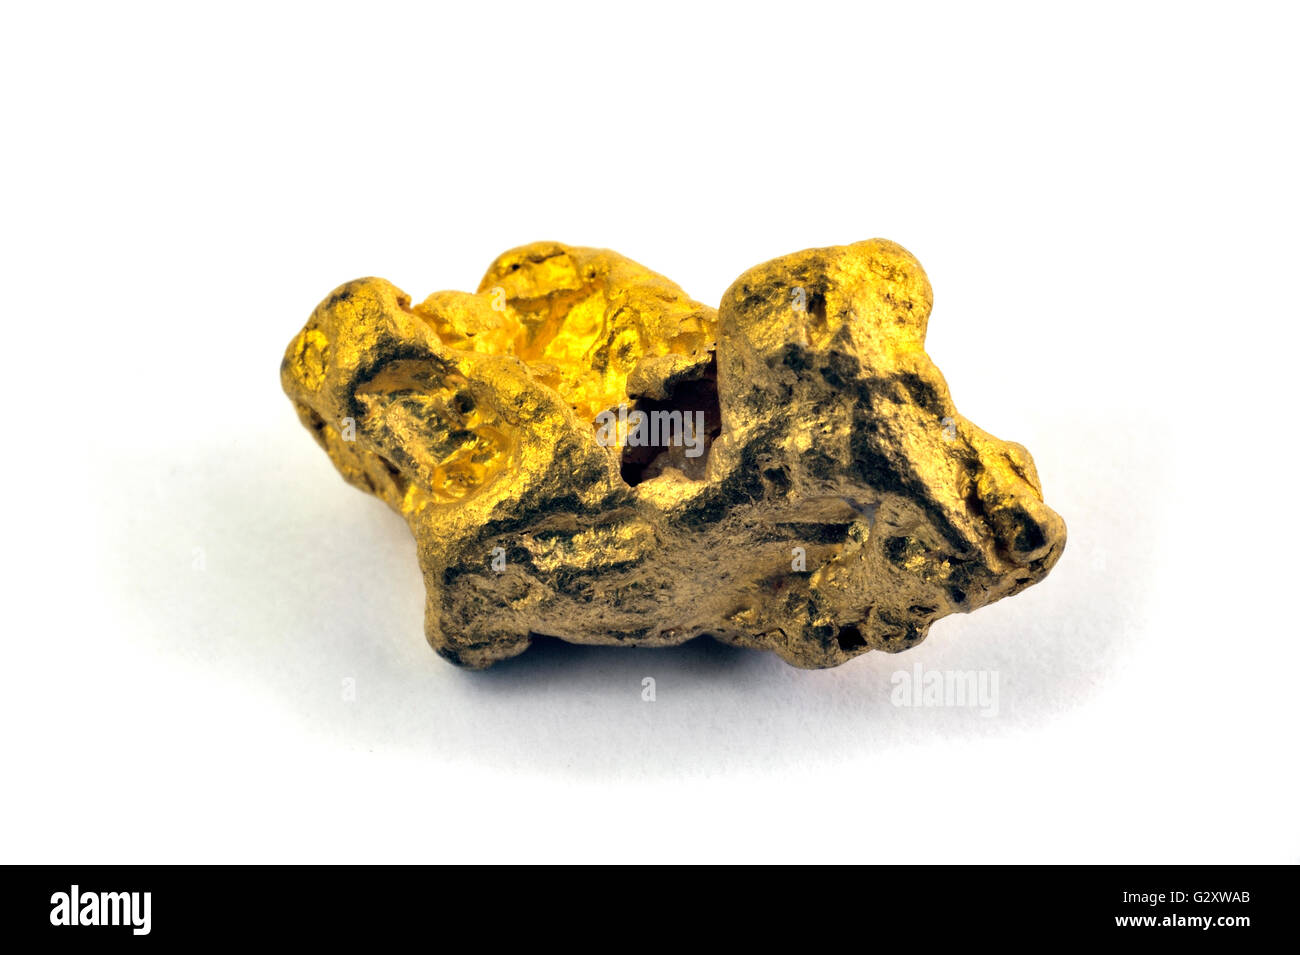 3,627 Raw Gold Nugget Images, Stock Photos, 3D objects, & Vectors